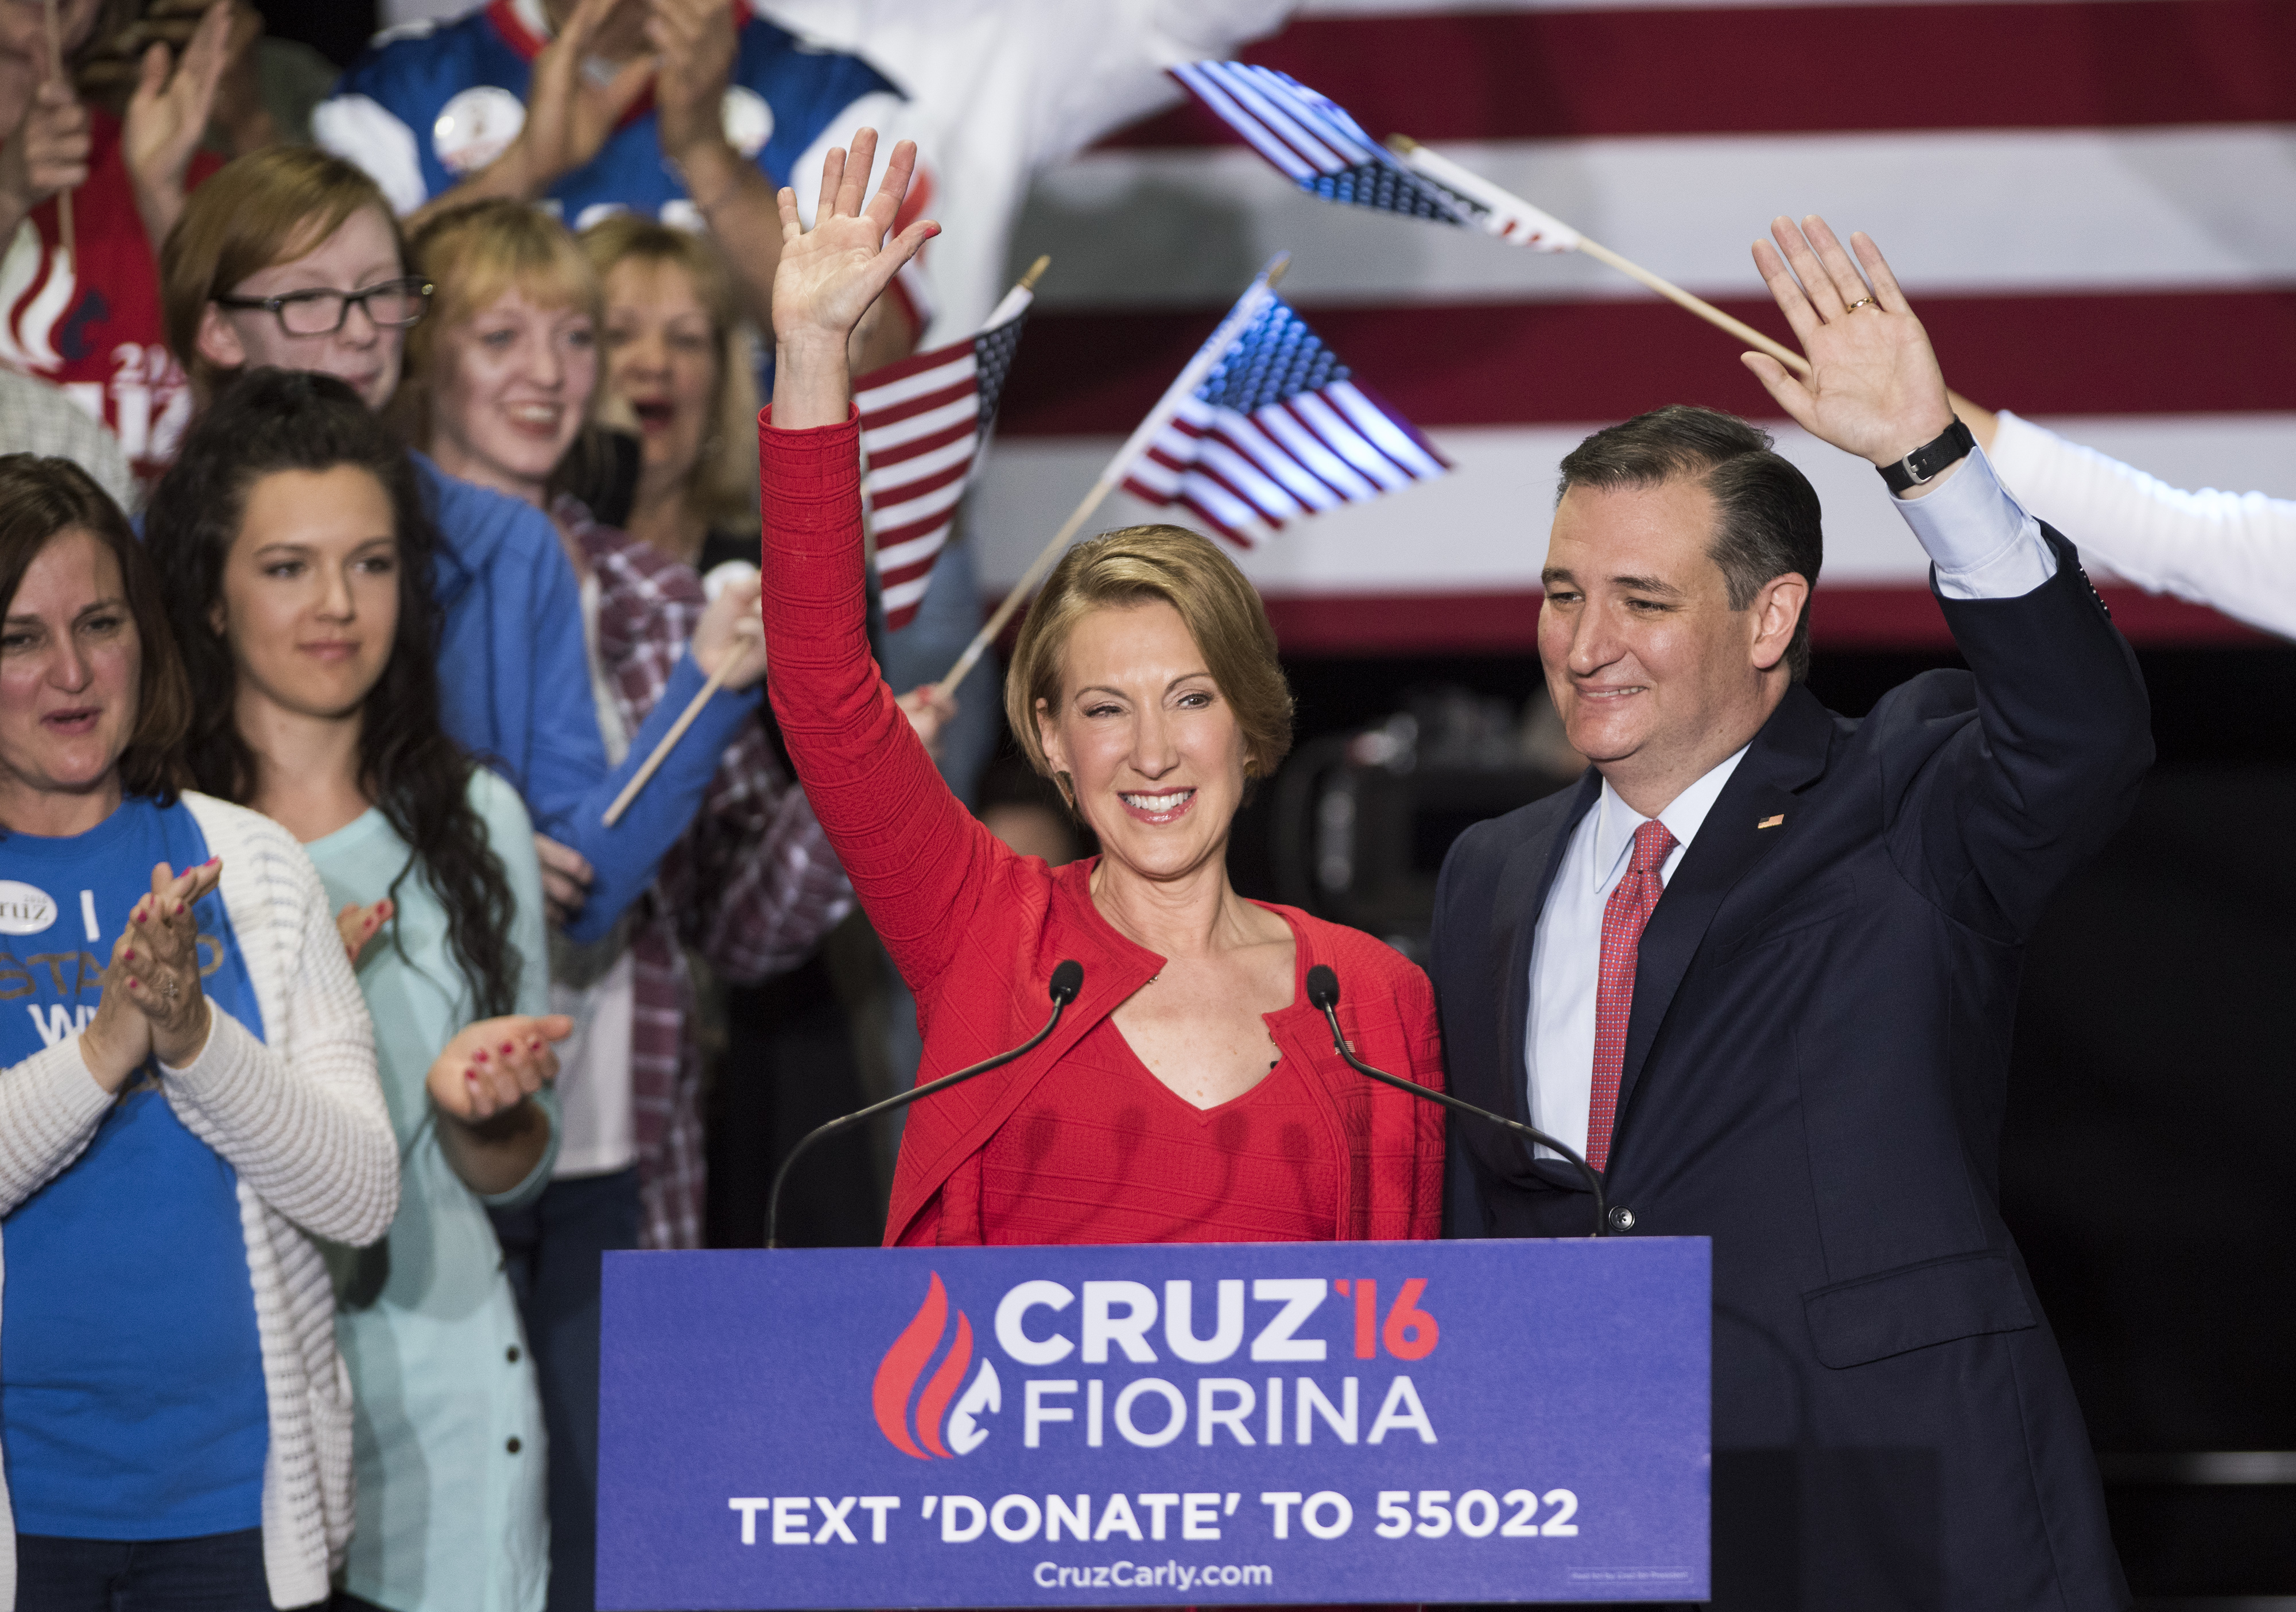 Republican presidential candidate Sen. Ted Cruz (R-TX) (R)  greets supporters with former Hewlett-Packard chief executive Carly Fiorina at a campaign rally in the Pavilion at the Pan Am Plaza in Indianapolis on April 27, 2016.